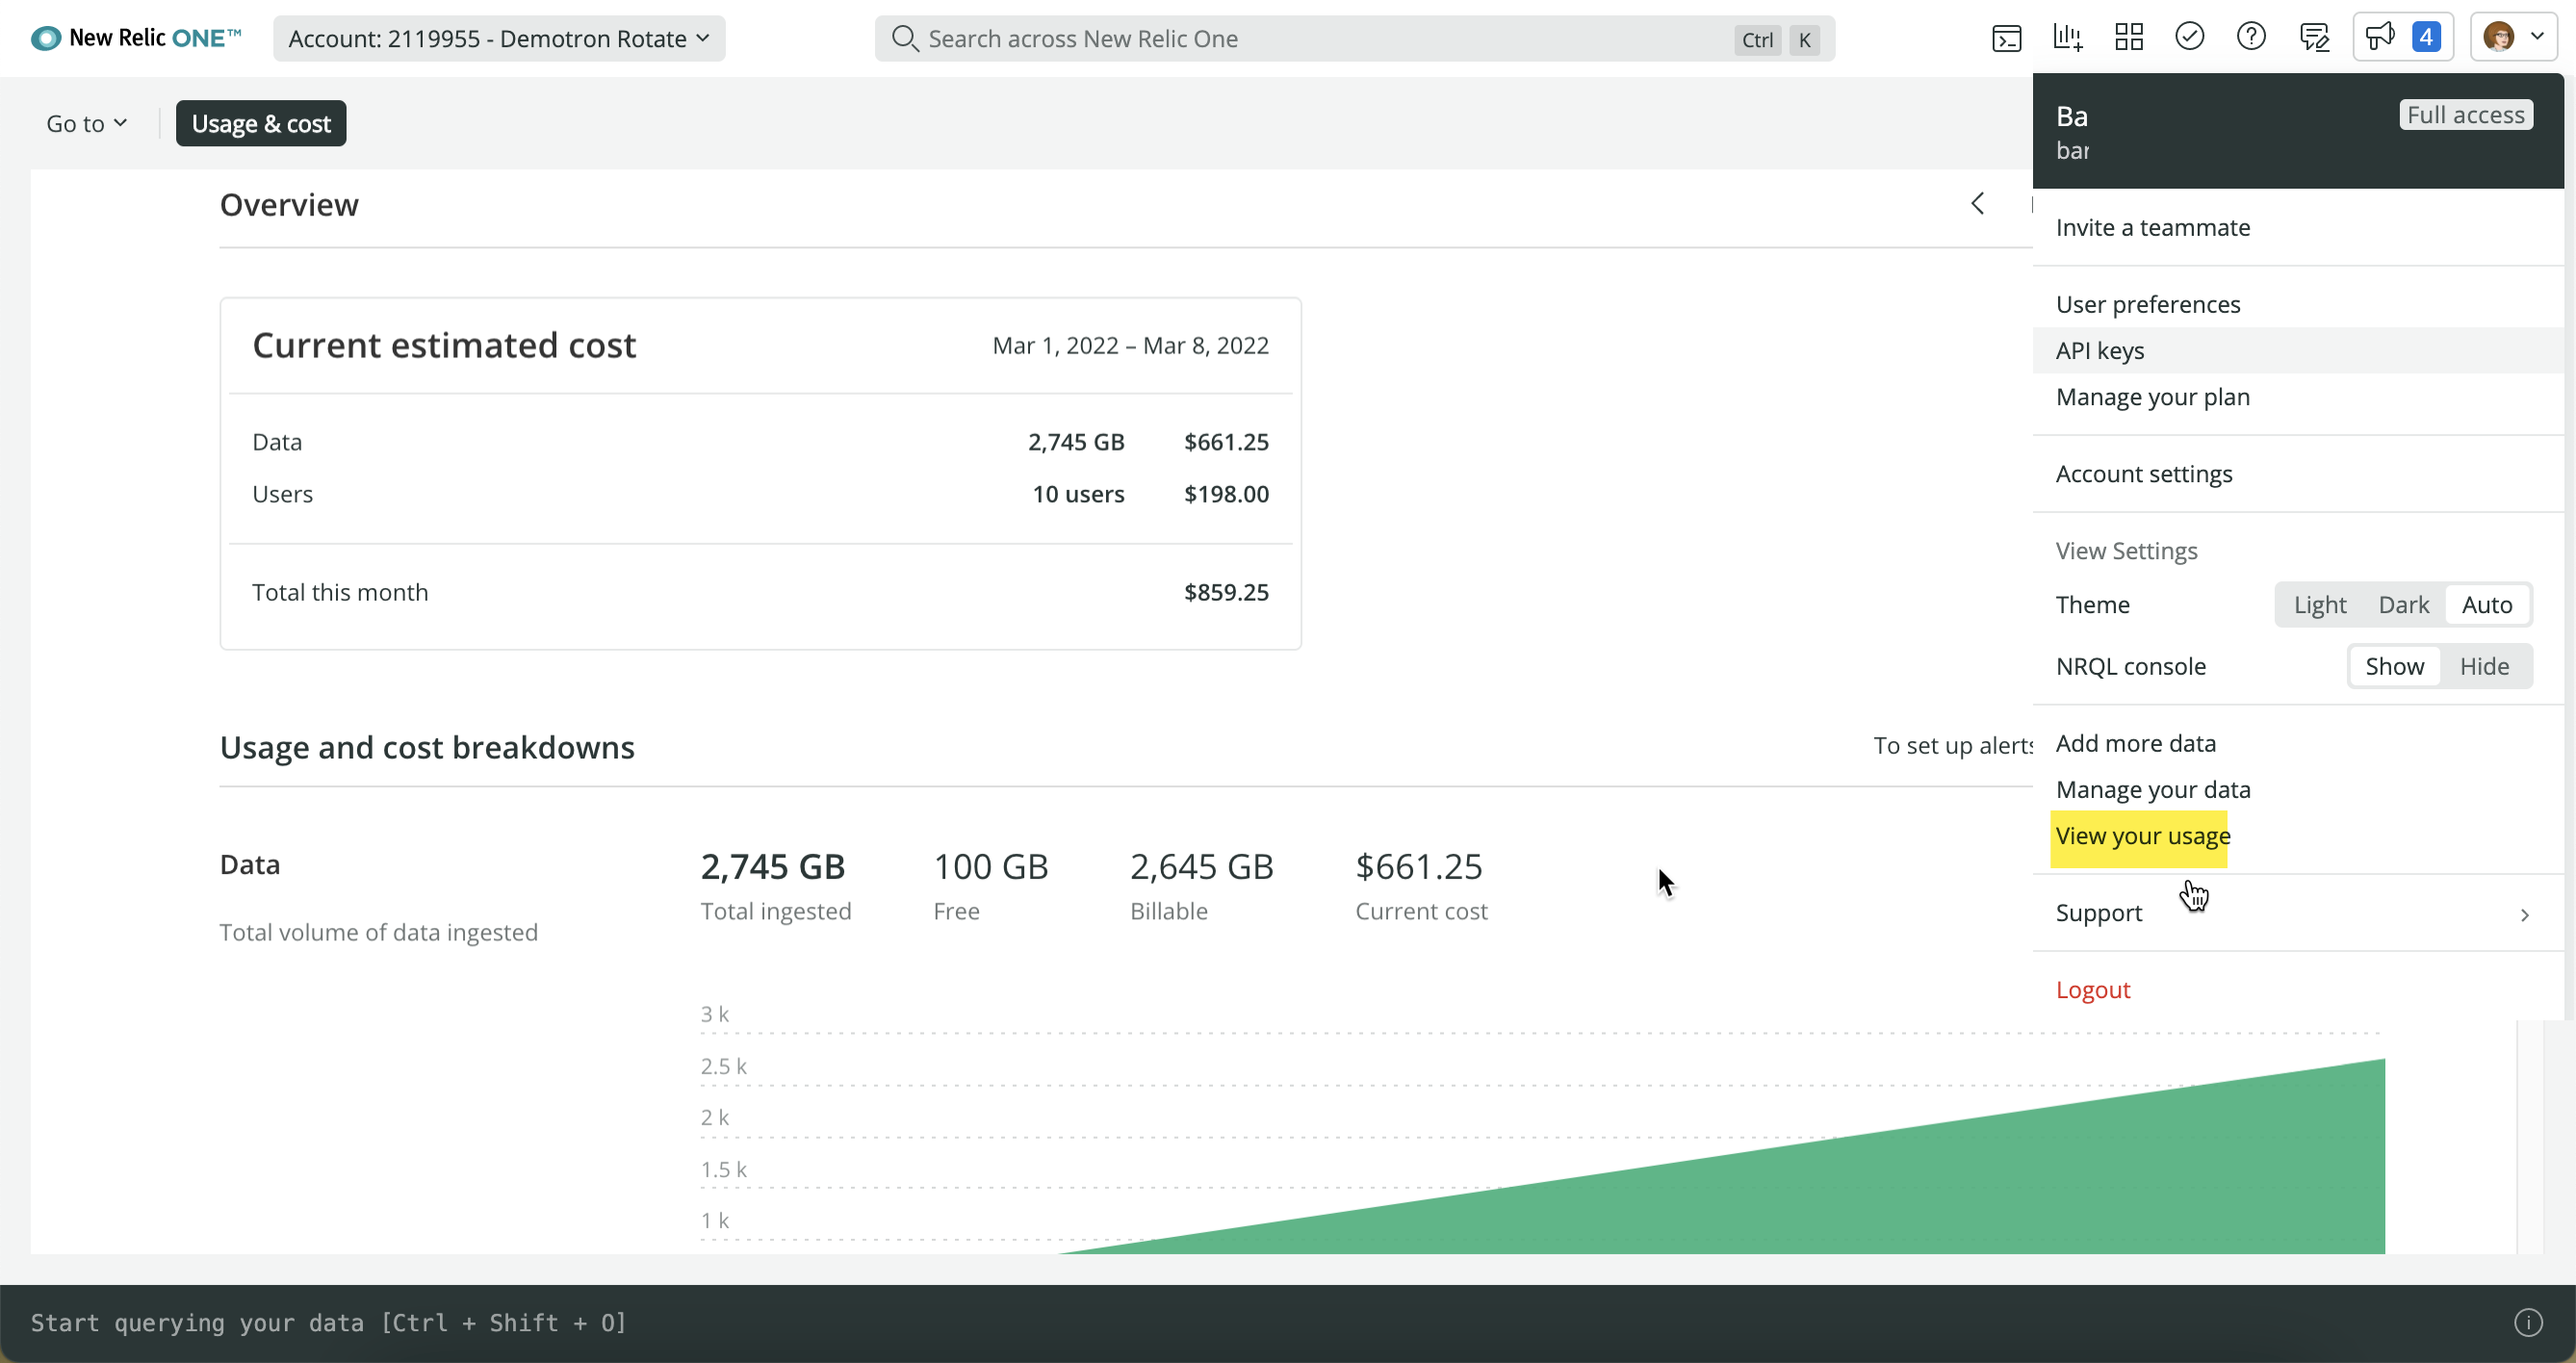 Screenshot of View data and usage page in UI